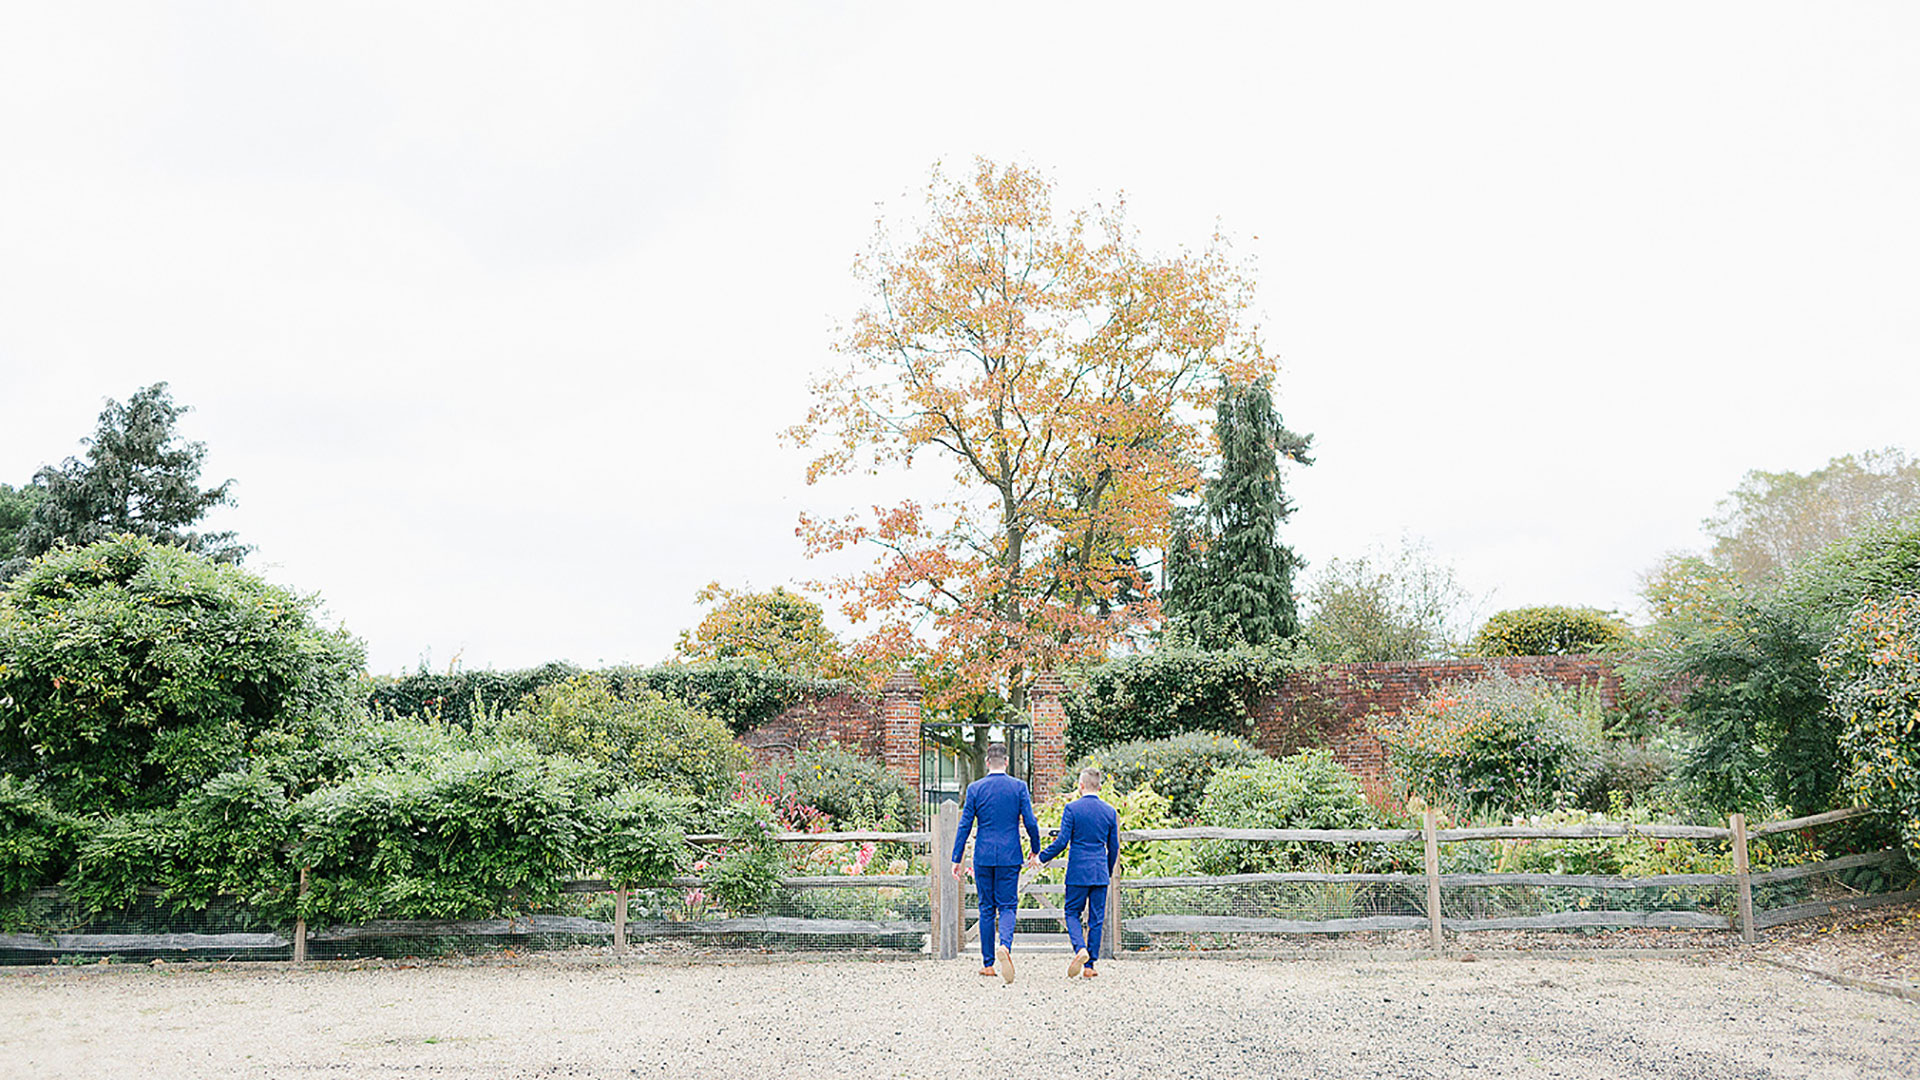 A happy couple make their way to the Long Walk wedding aisle lined with colourful flowers